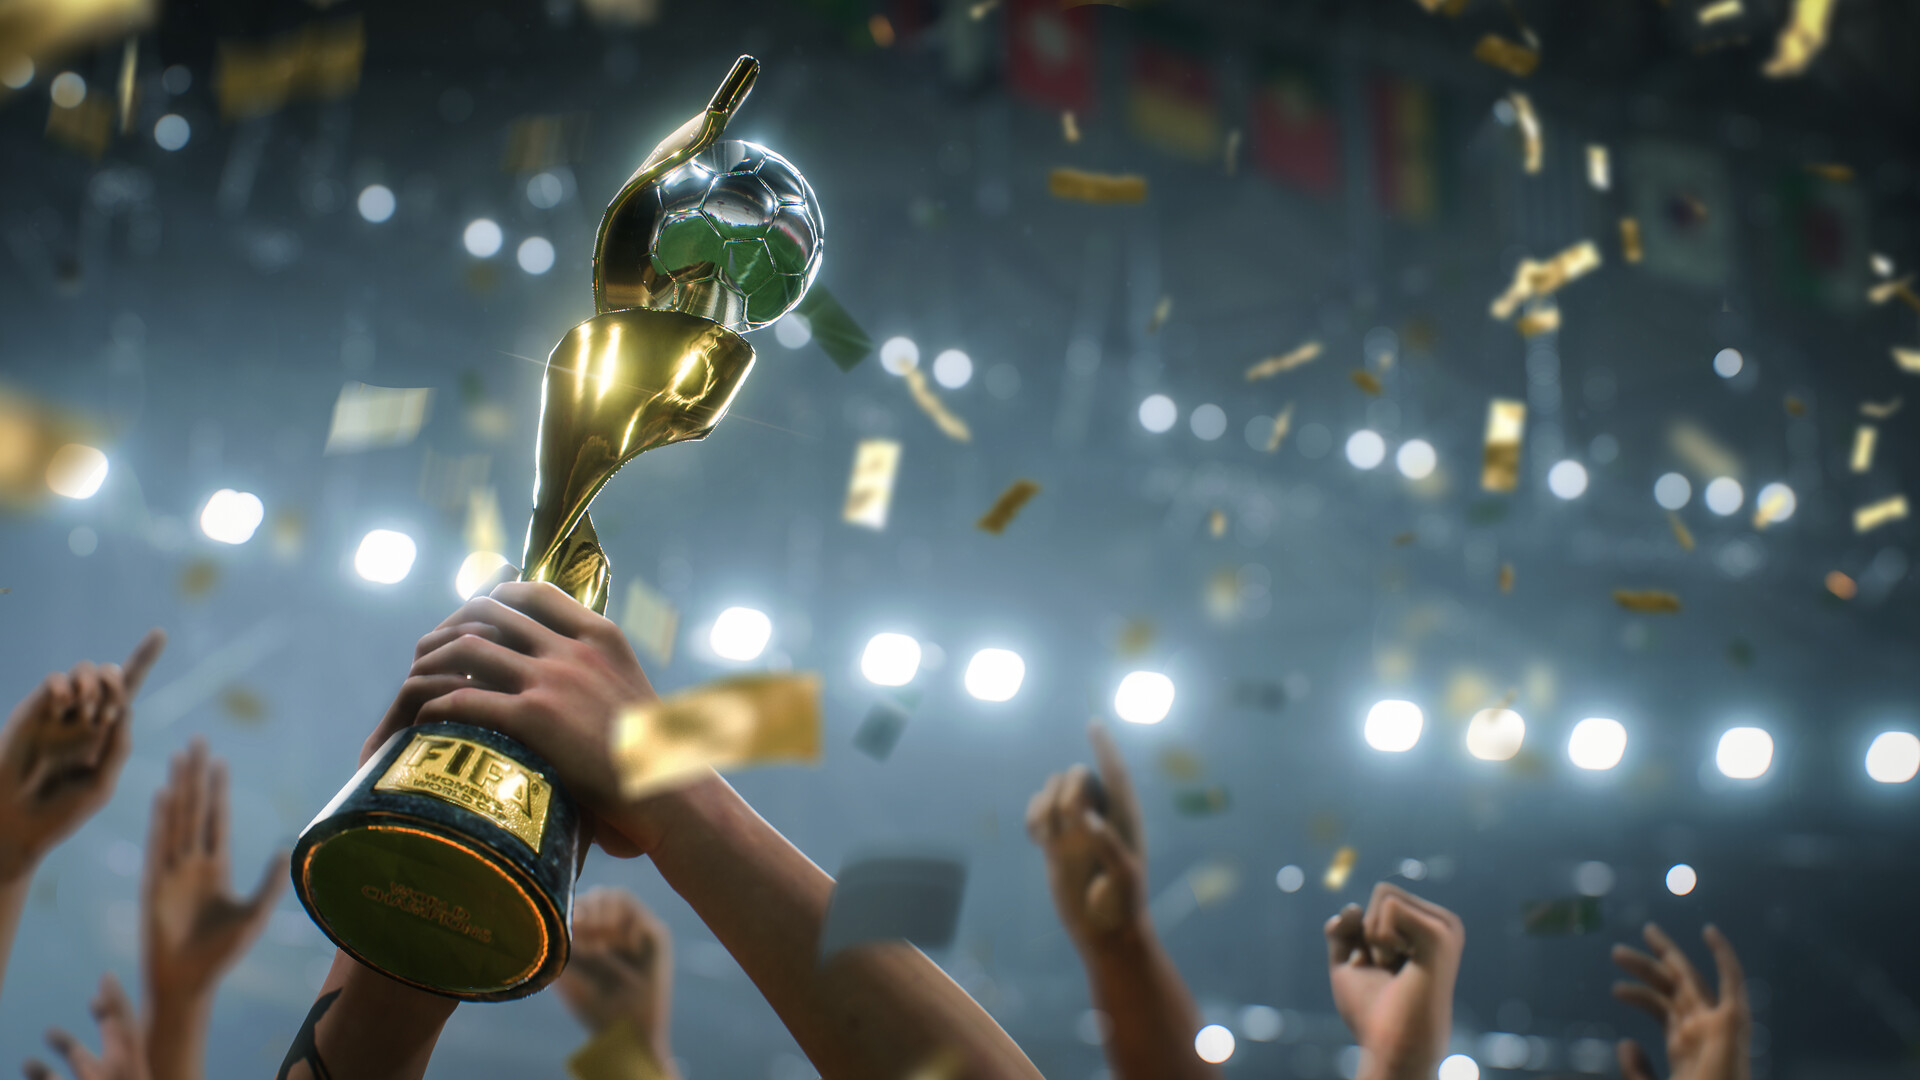 Steam Deck and Docking Station Tops the Steam Charts, FIFA 23 Takes 3rd